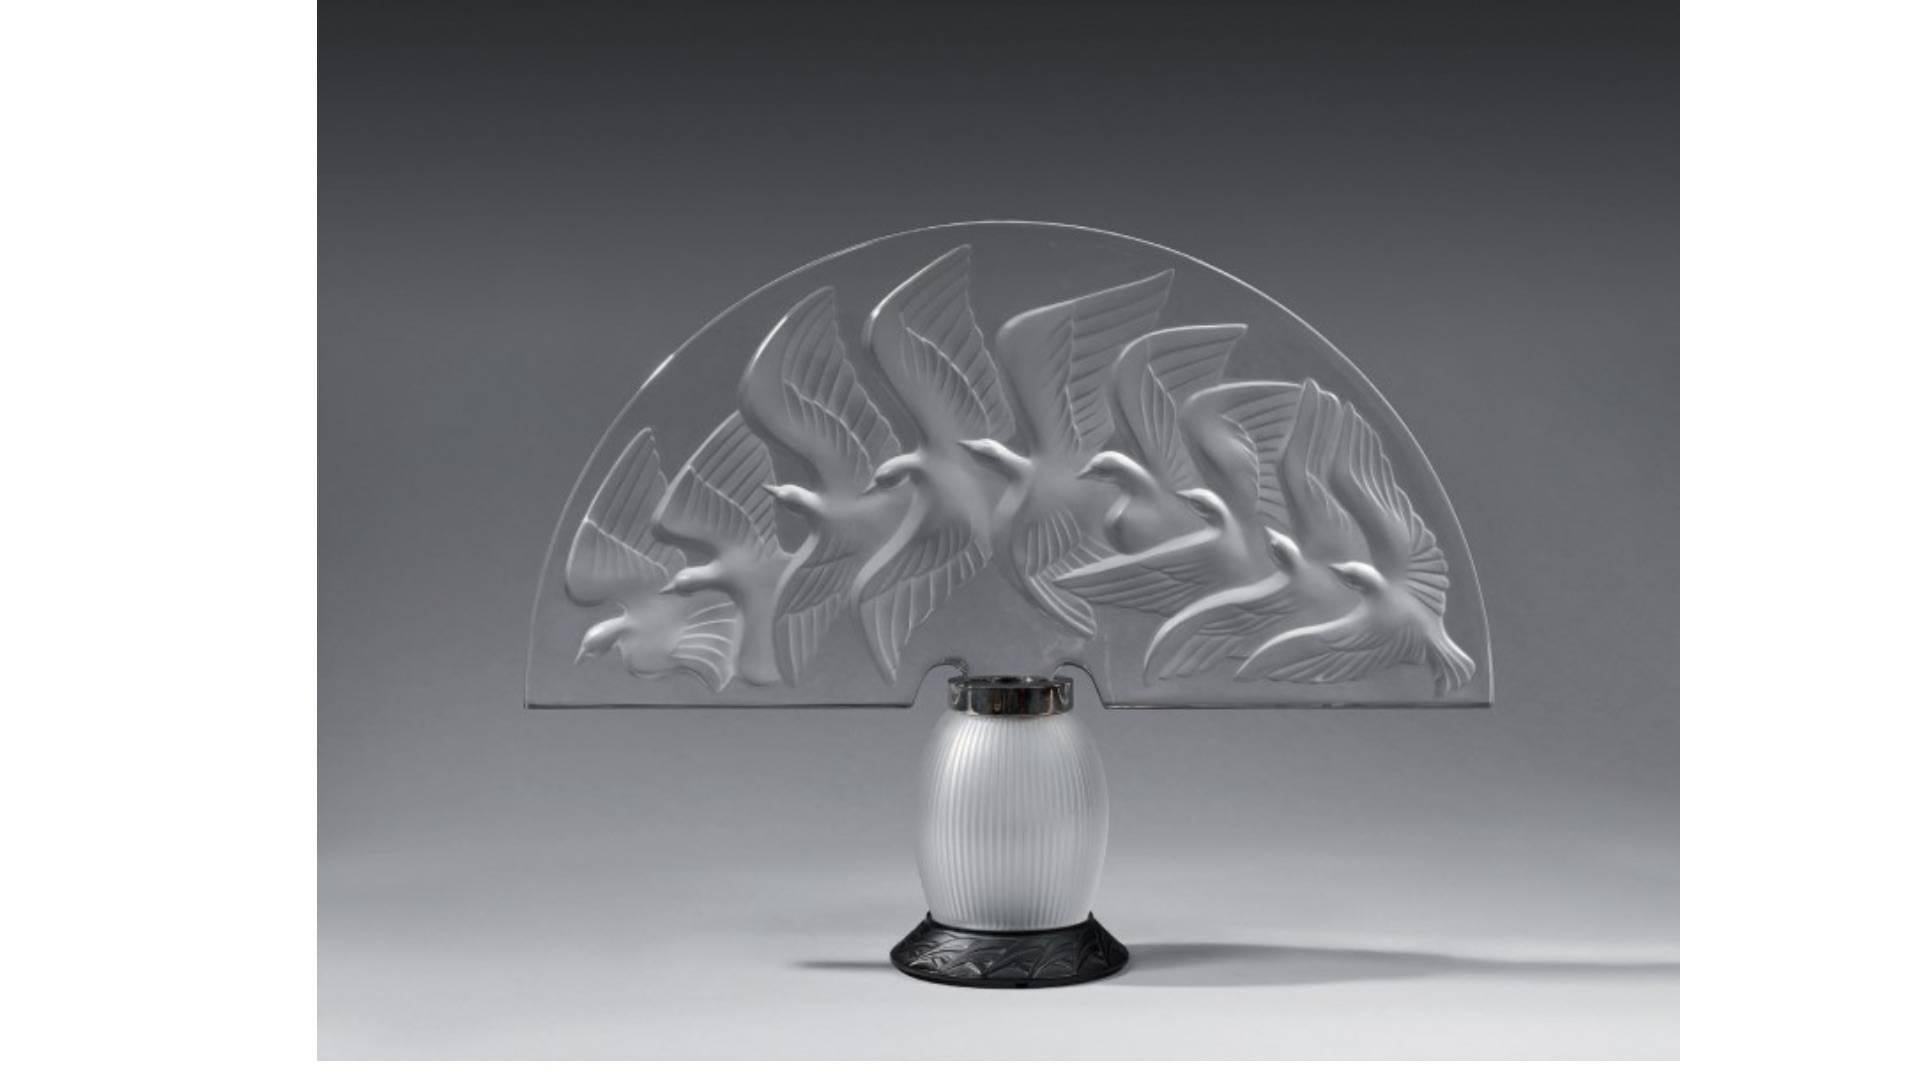 Lalique crystal Hokkaido lamp, frosted and clear art glass table lamp with doves
Lalique crystal Hokkaido frosted and clear crystal lamp.
Designed 1990 by Marie-Claude Lalique, etched in script ''Lalique France'', the base further etched